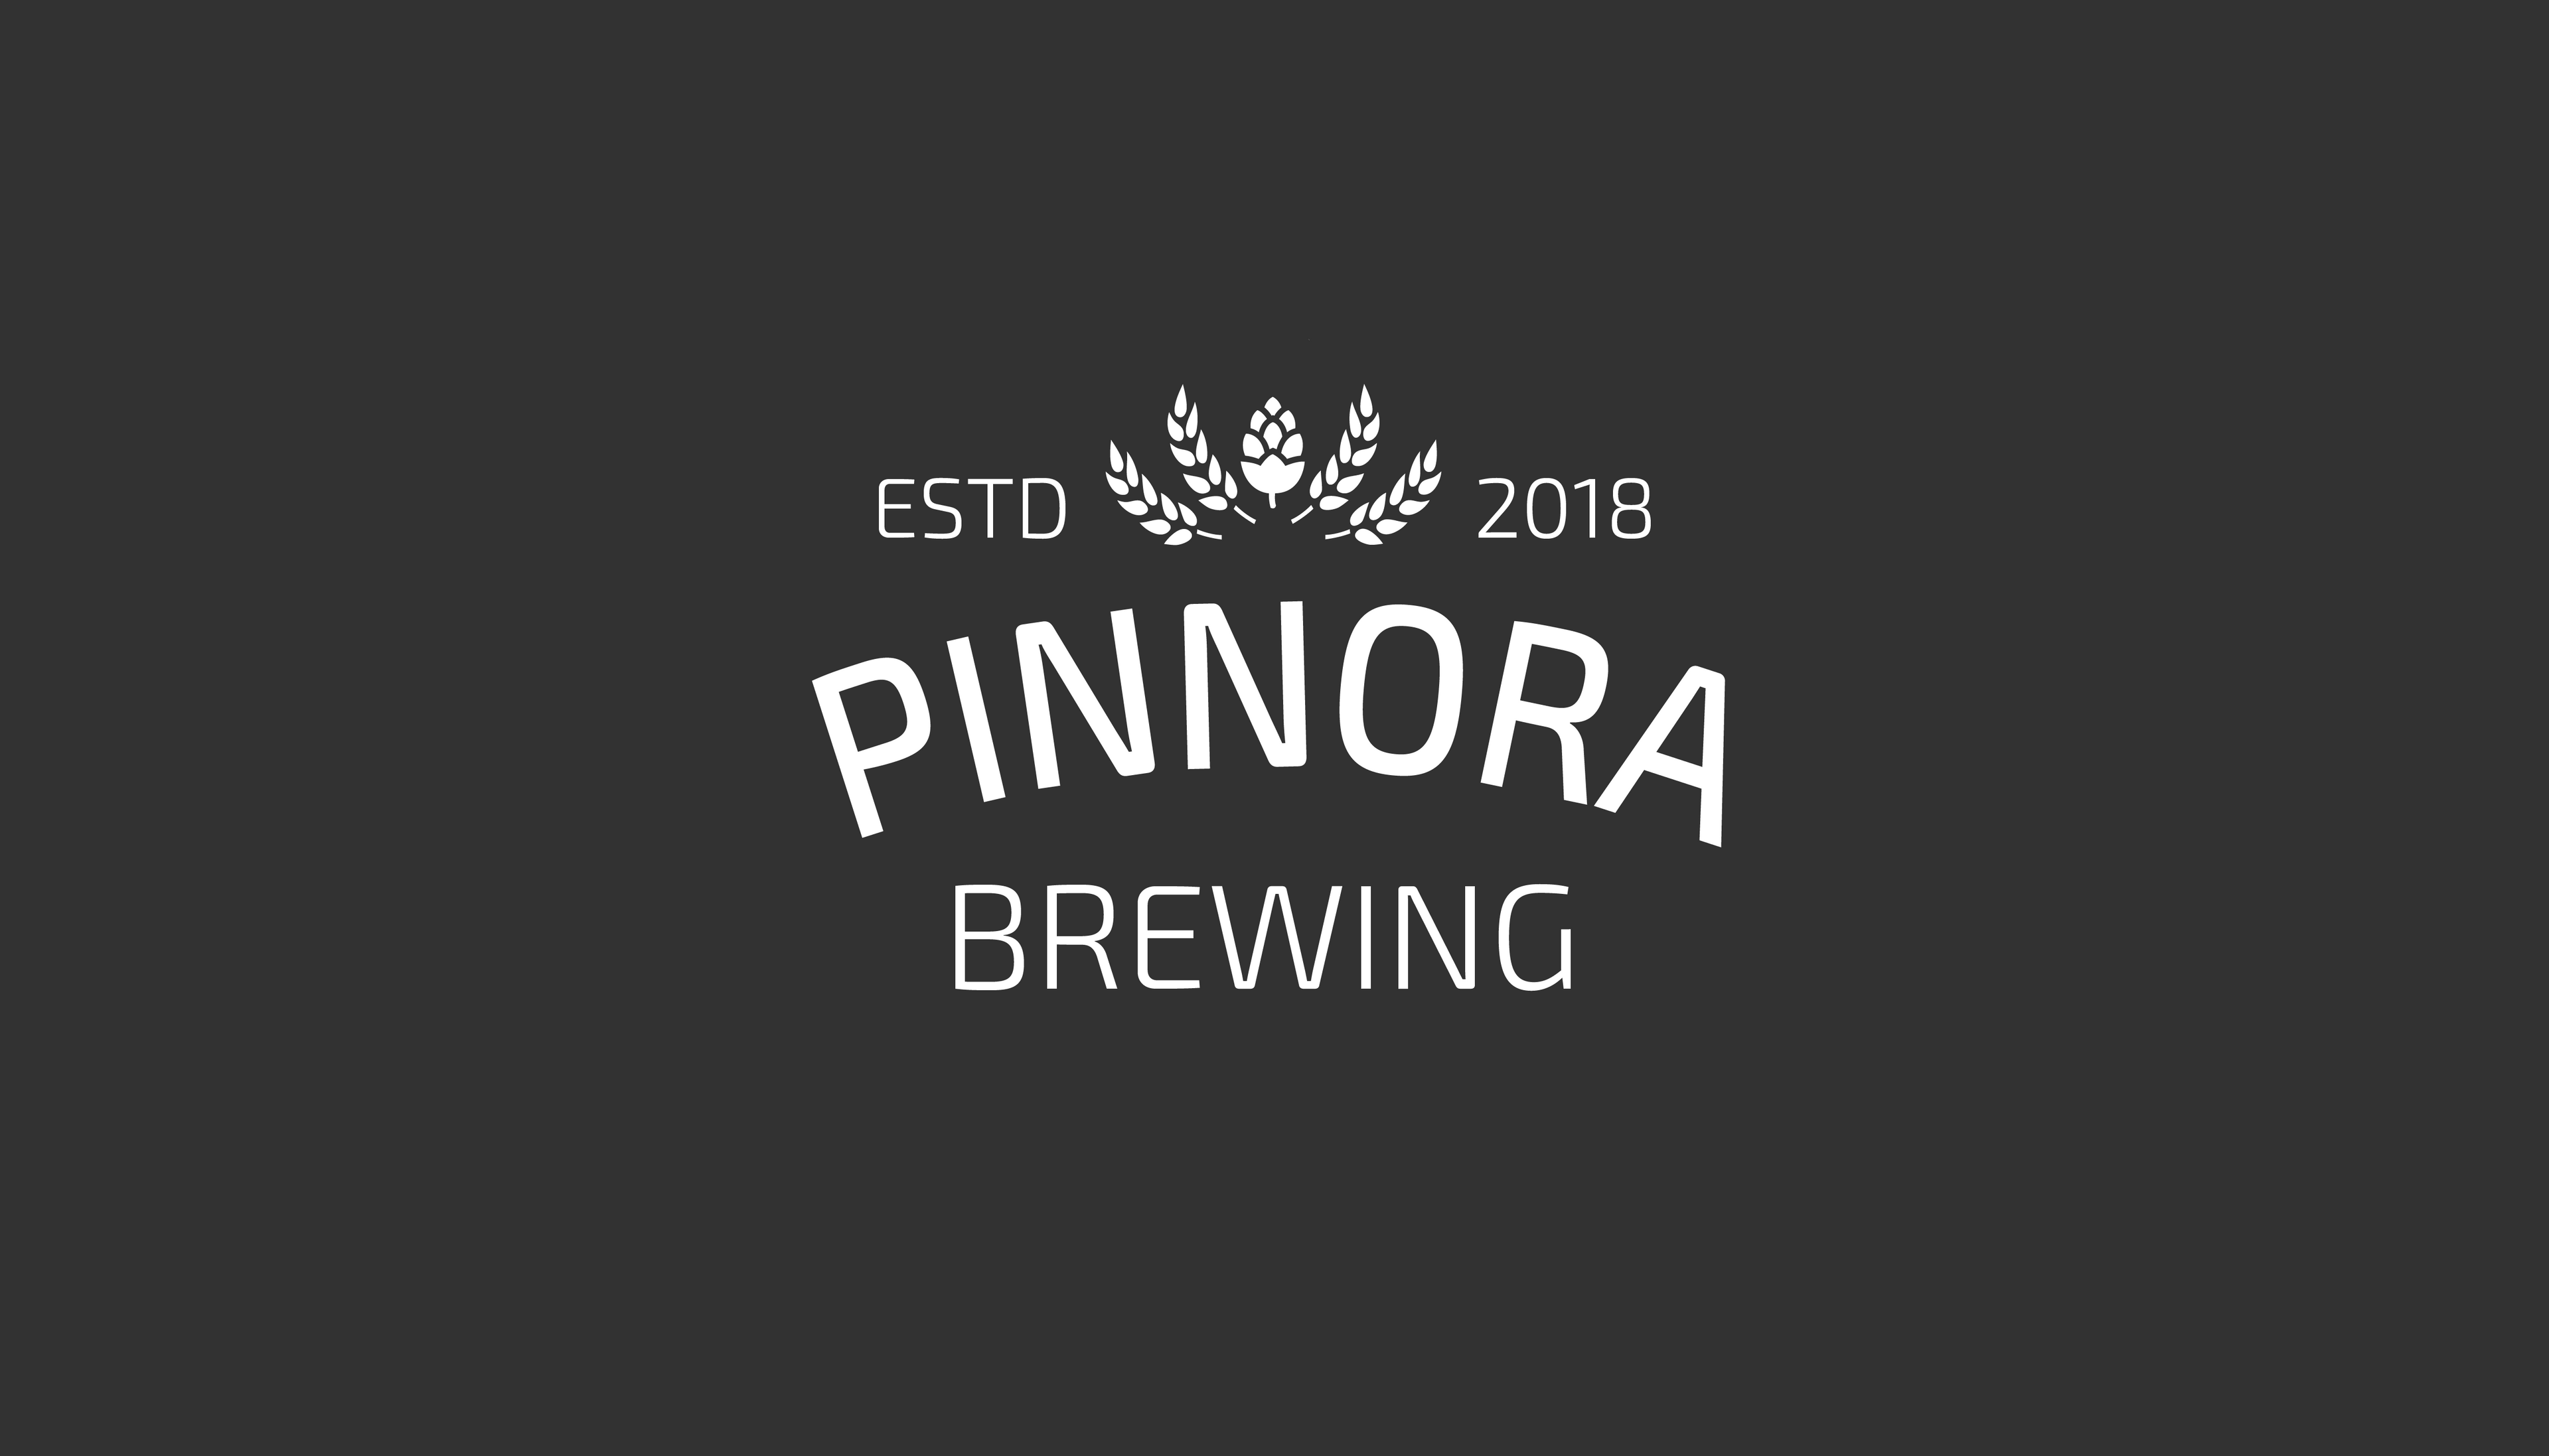 Load video: Introducing Pinnora Brewing